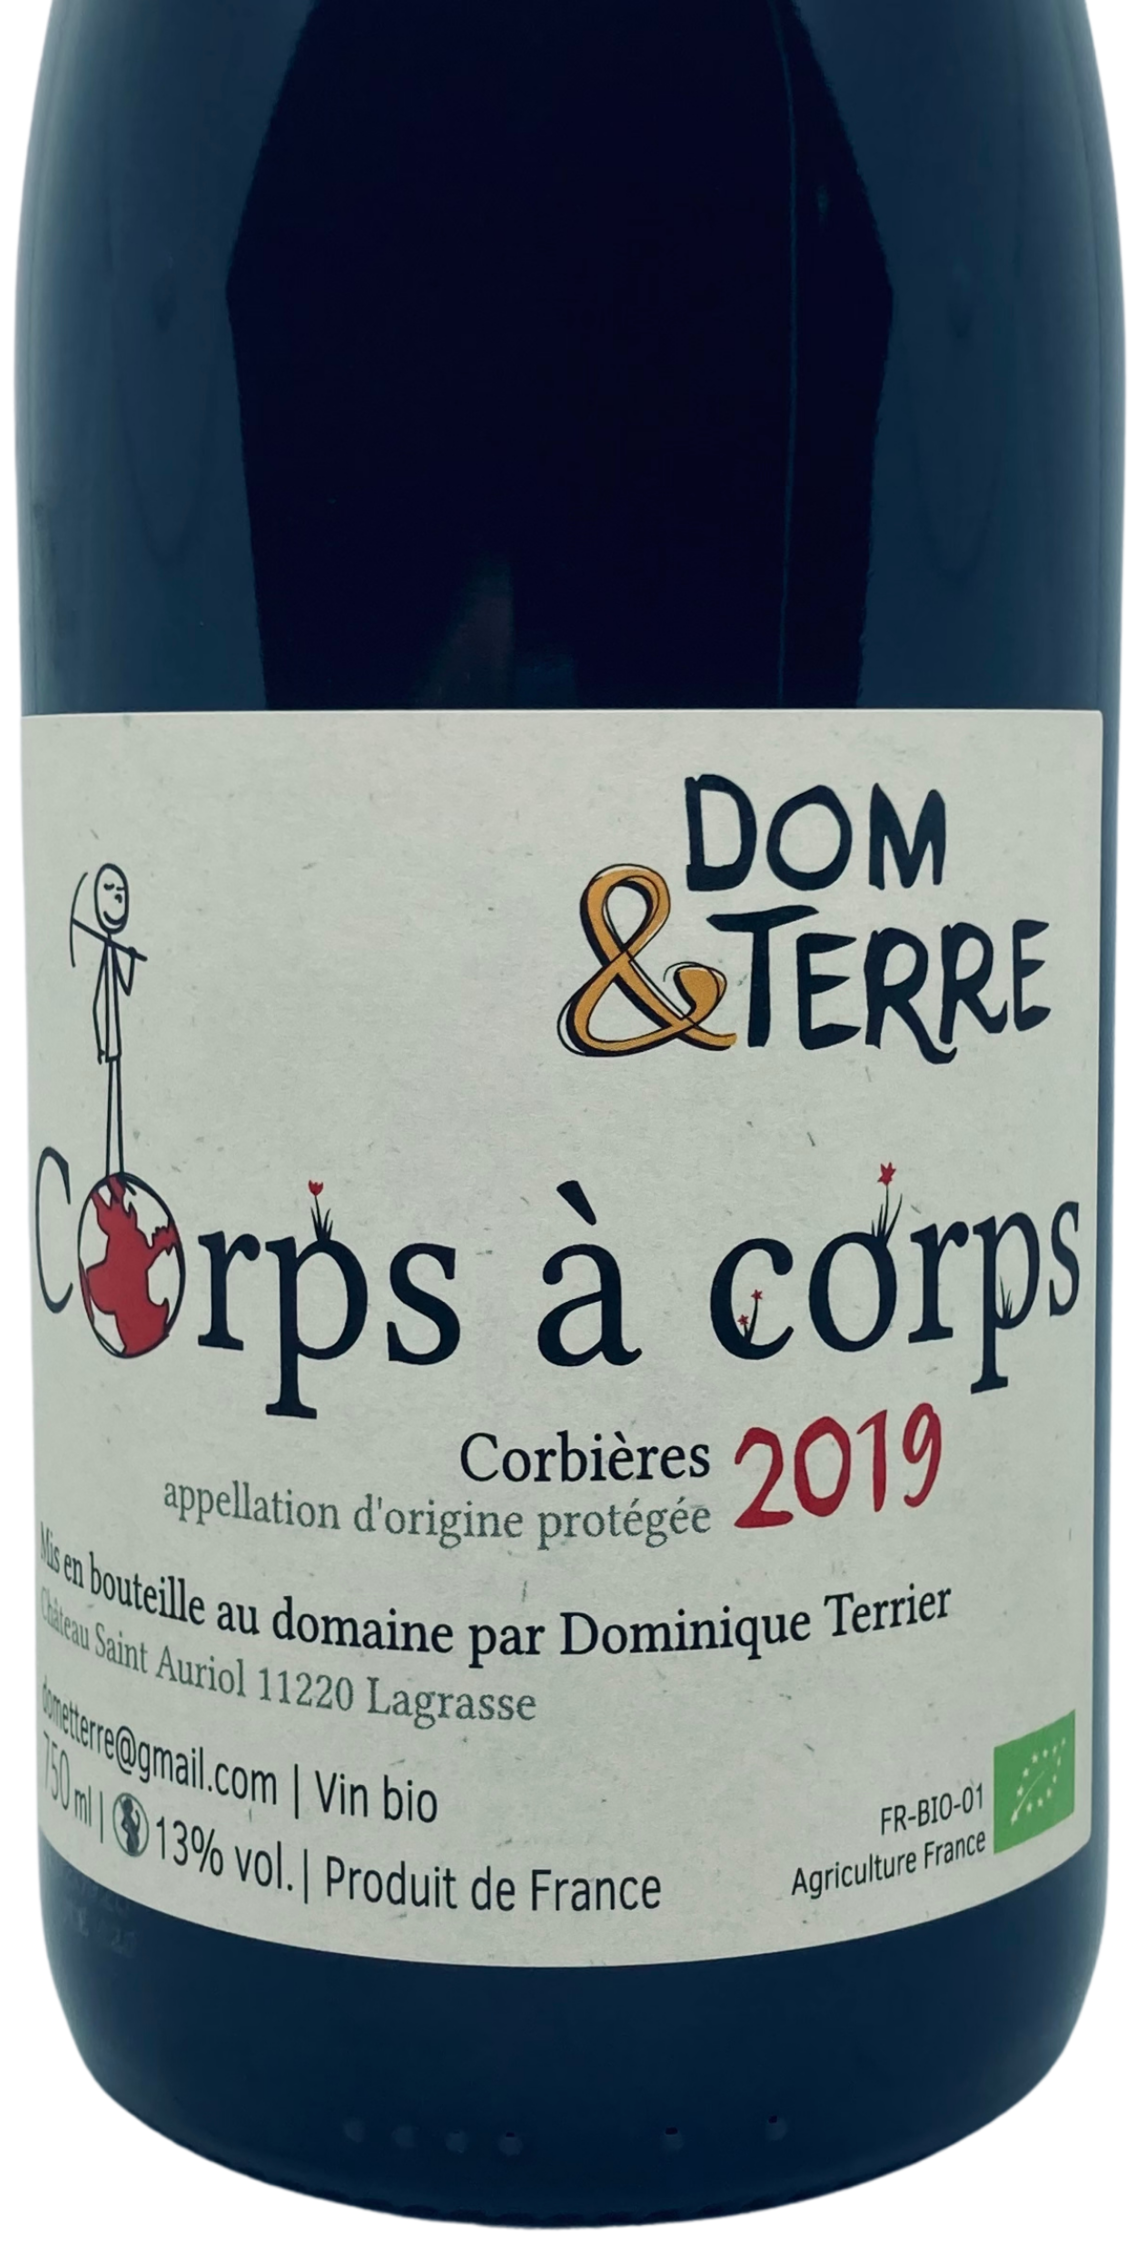 dometterre-corpsacorps-2019